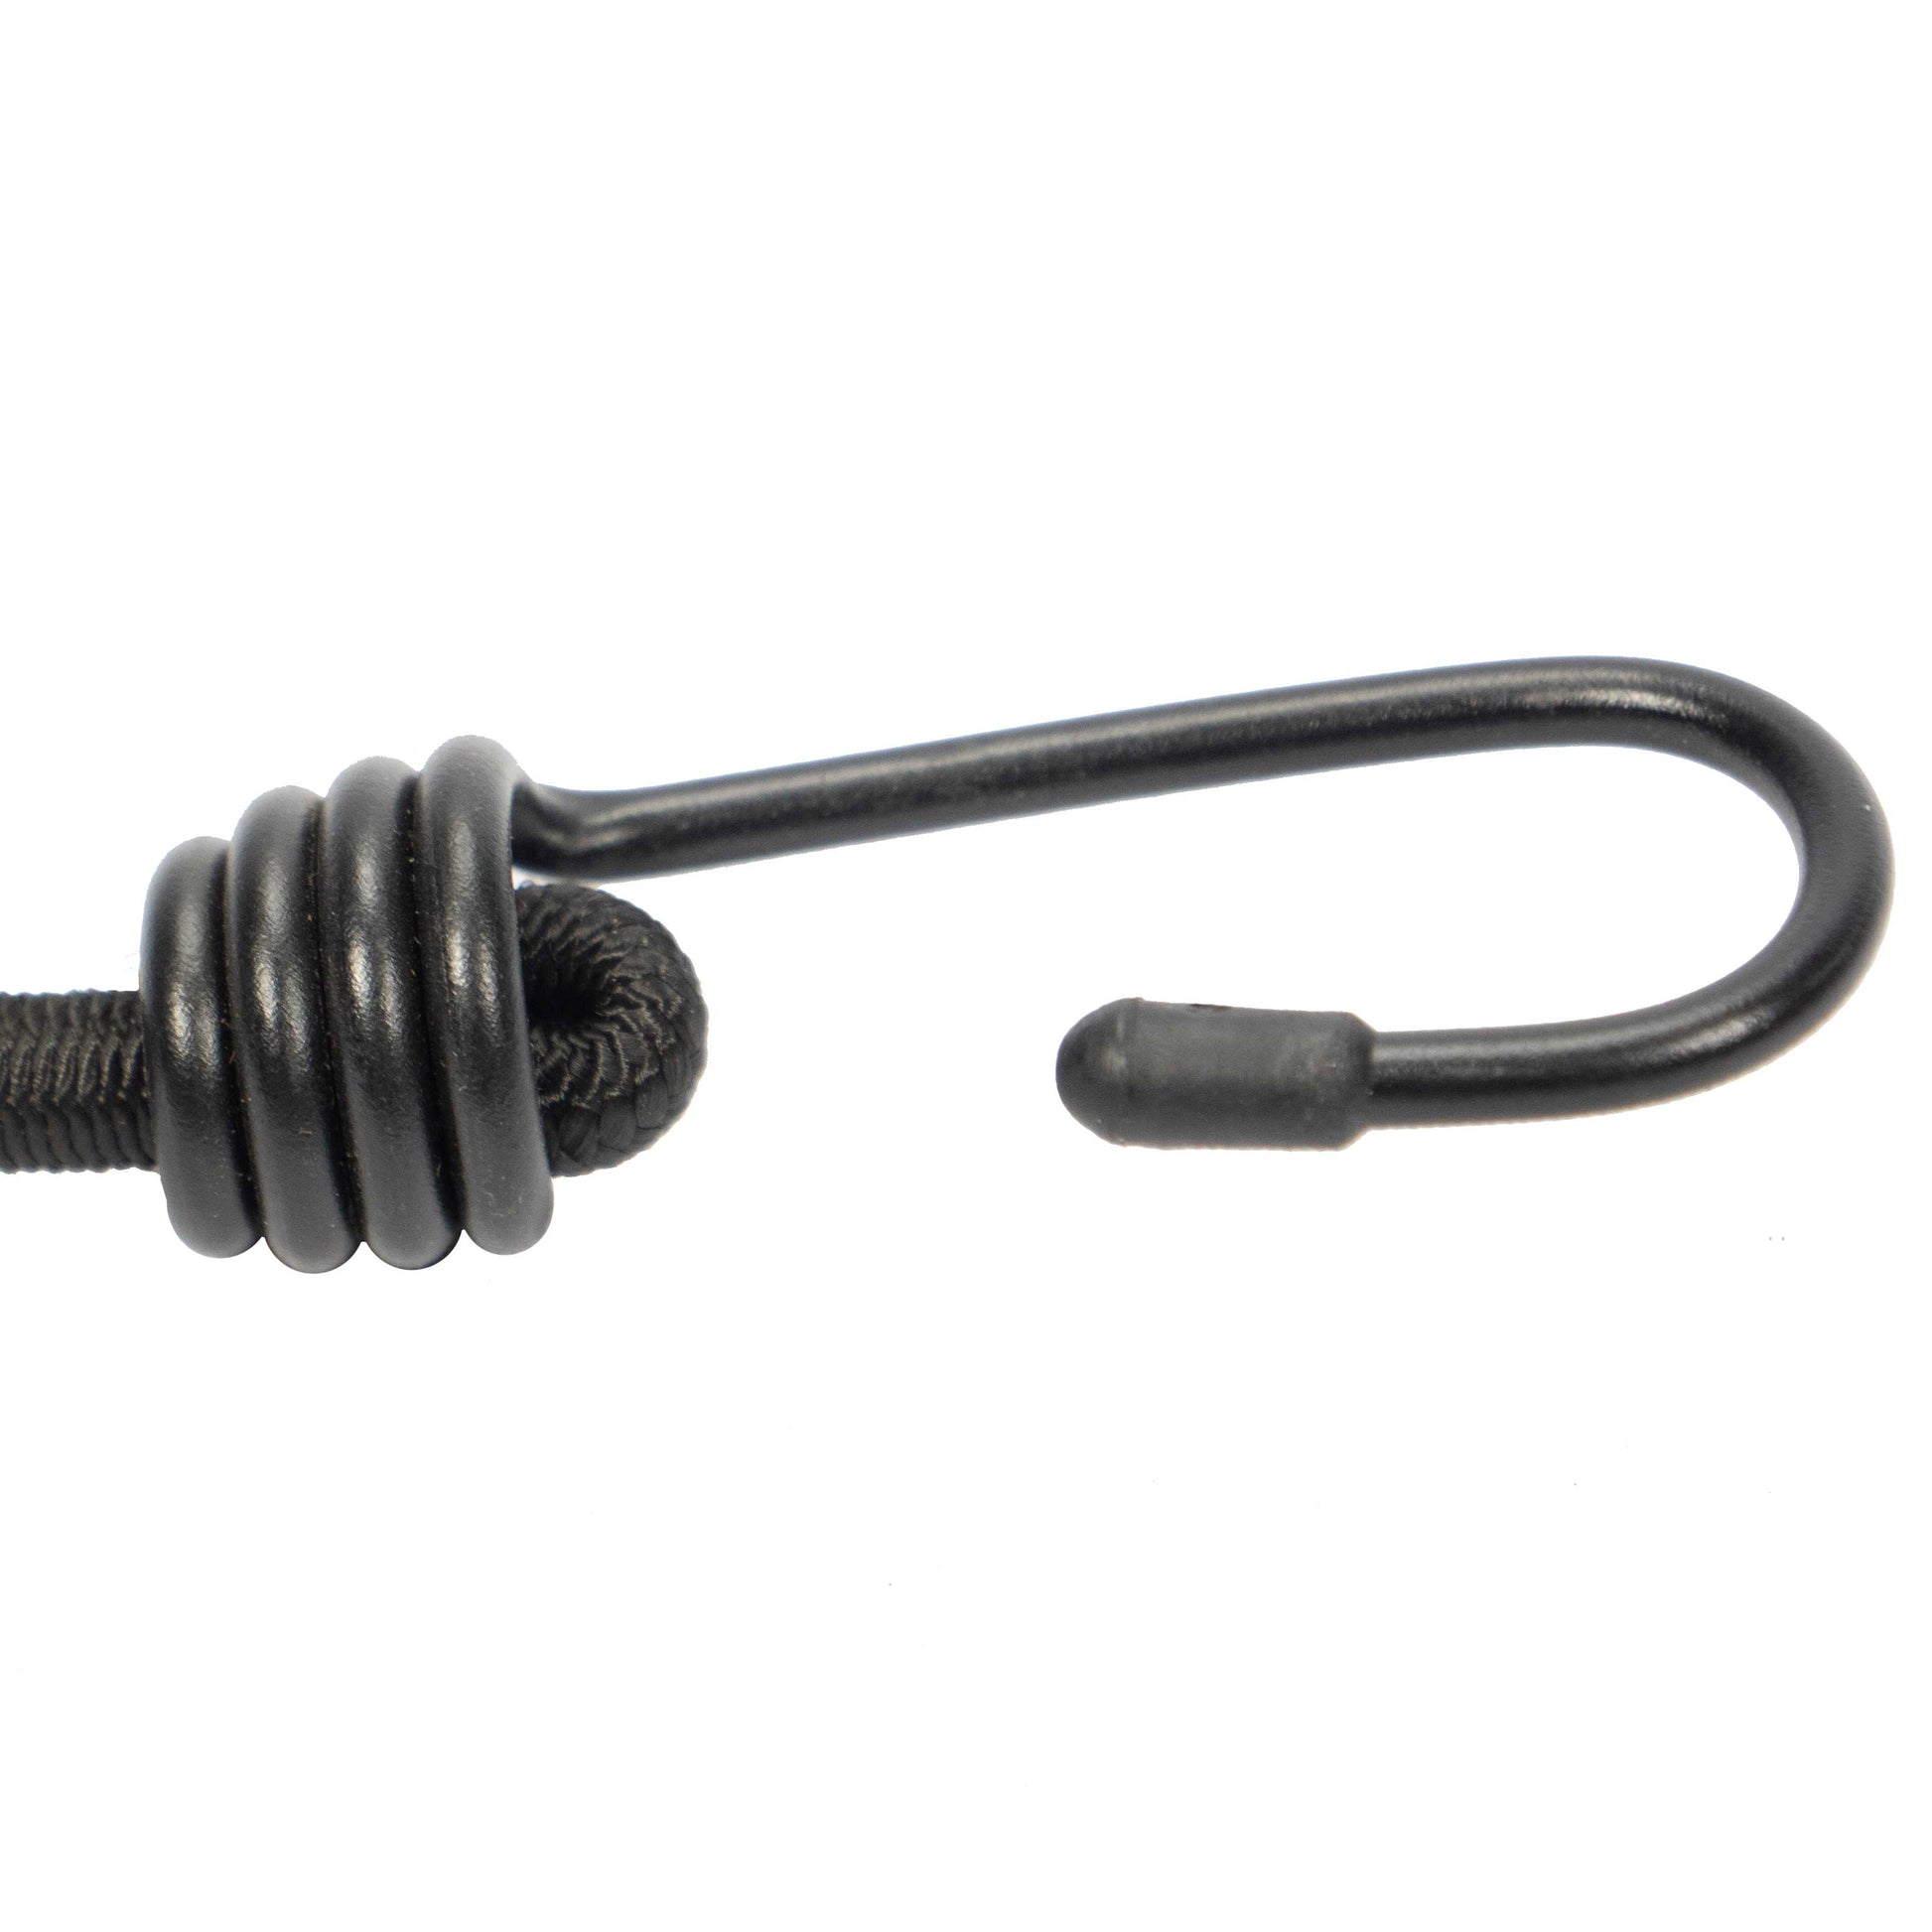 12 inch x 18 inch Black Bungee Cords (bundle of 25) 12mm image 1 of 8 image 2 of 8 image 3 of 8